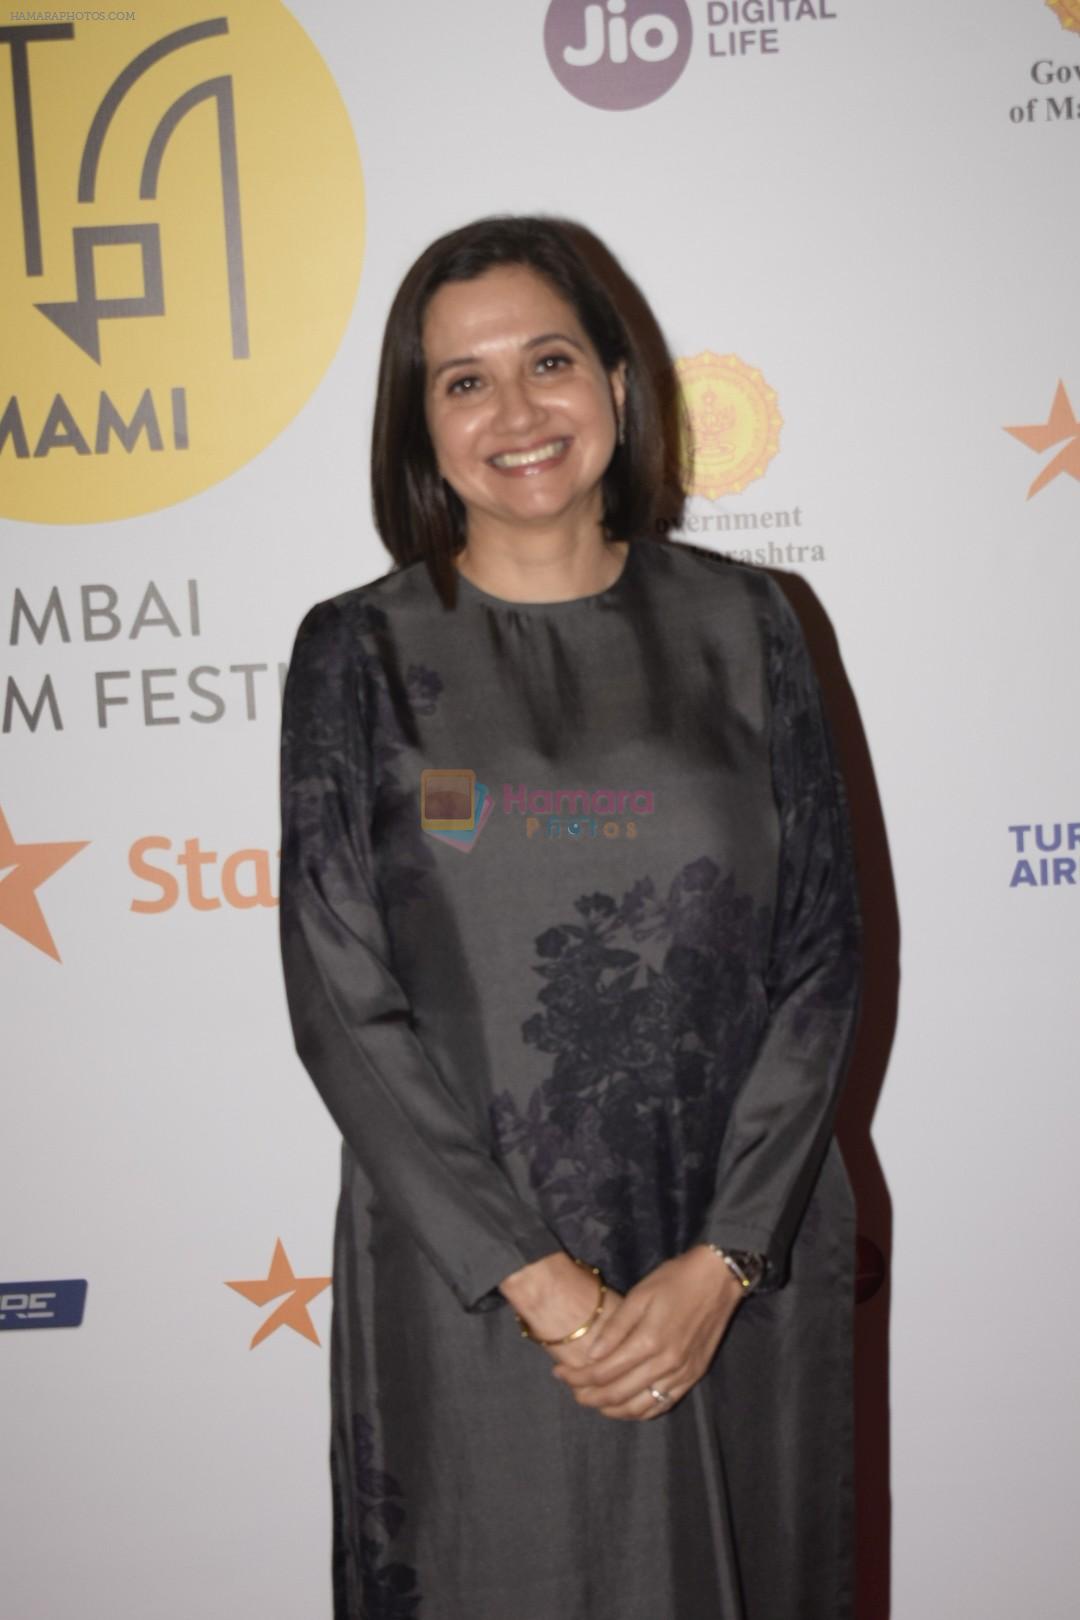 Anupama Chopra at the Screening Of Mami's Opening Film in Pvr Icon, Andheri on 26th Oct 2018